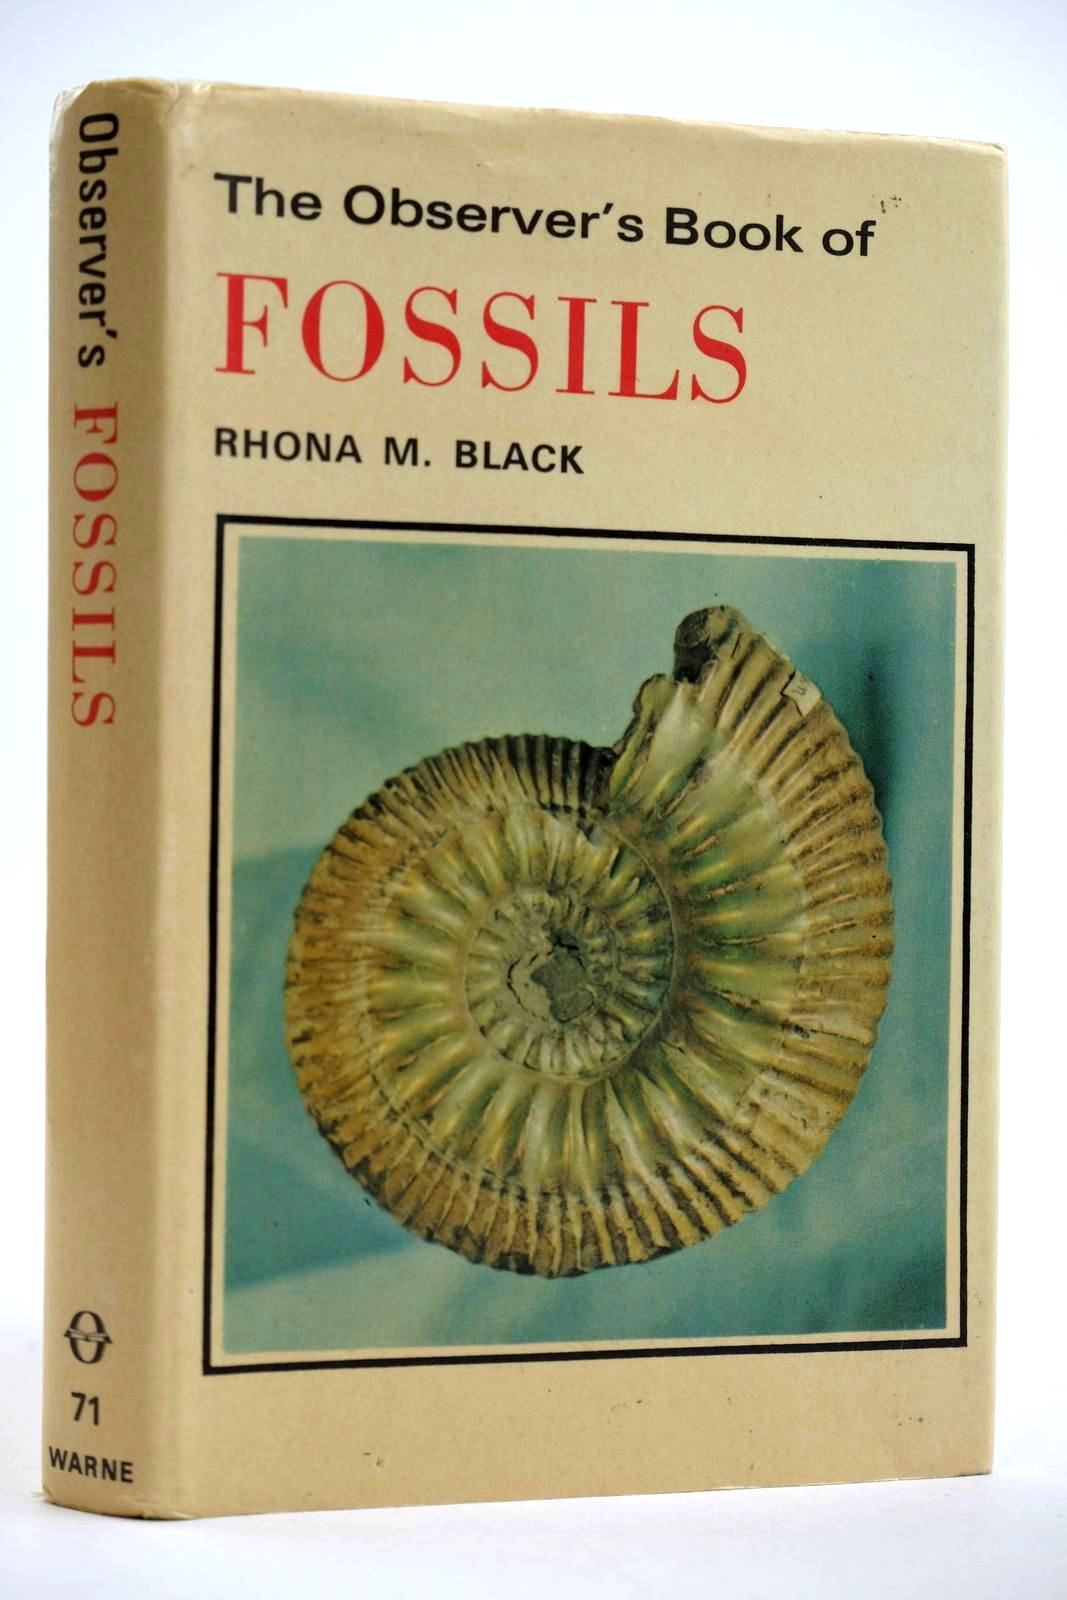 Photo of THE OBSERVER'S BOOK OF FOSSILS written by Black, Rhona M. illustrated by Black, Rhona M. published by Frederick Warne &amp; Co Ltd. (STOCK CODE: 2132051)  for sale by Stella & Rose's Books